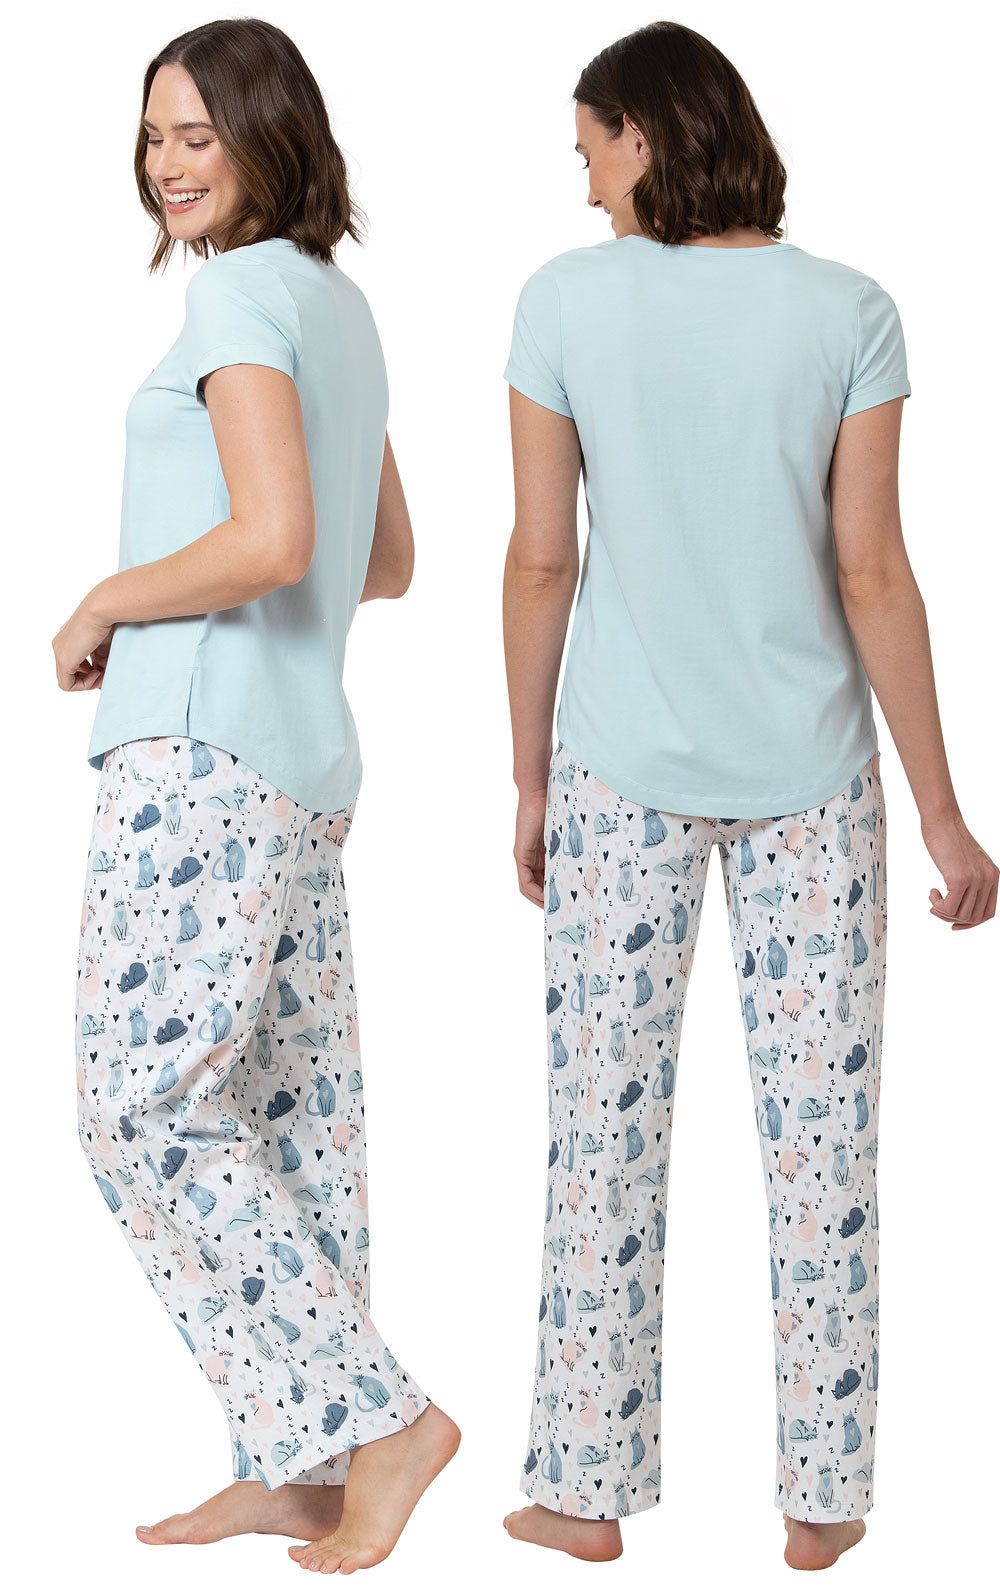 The Purrrfect Mom PJs